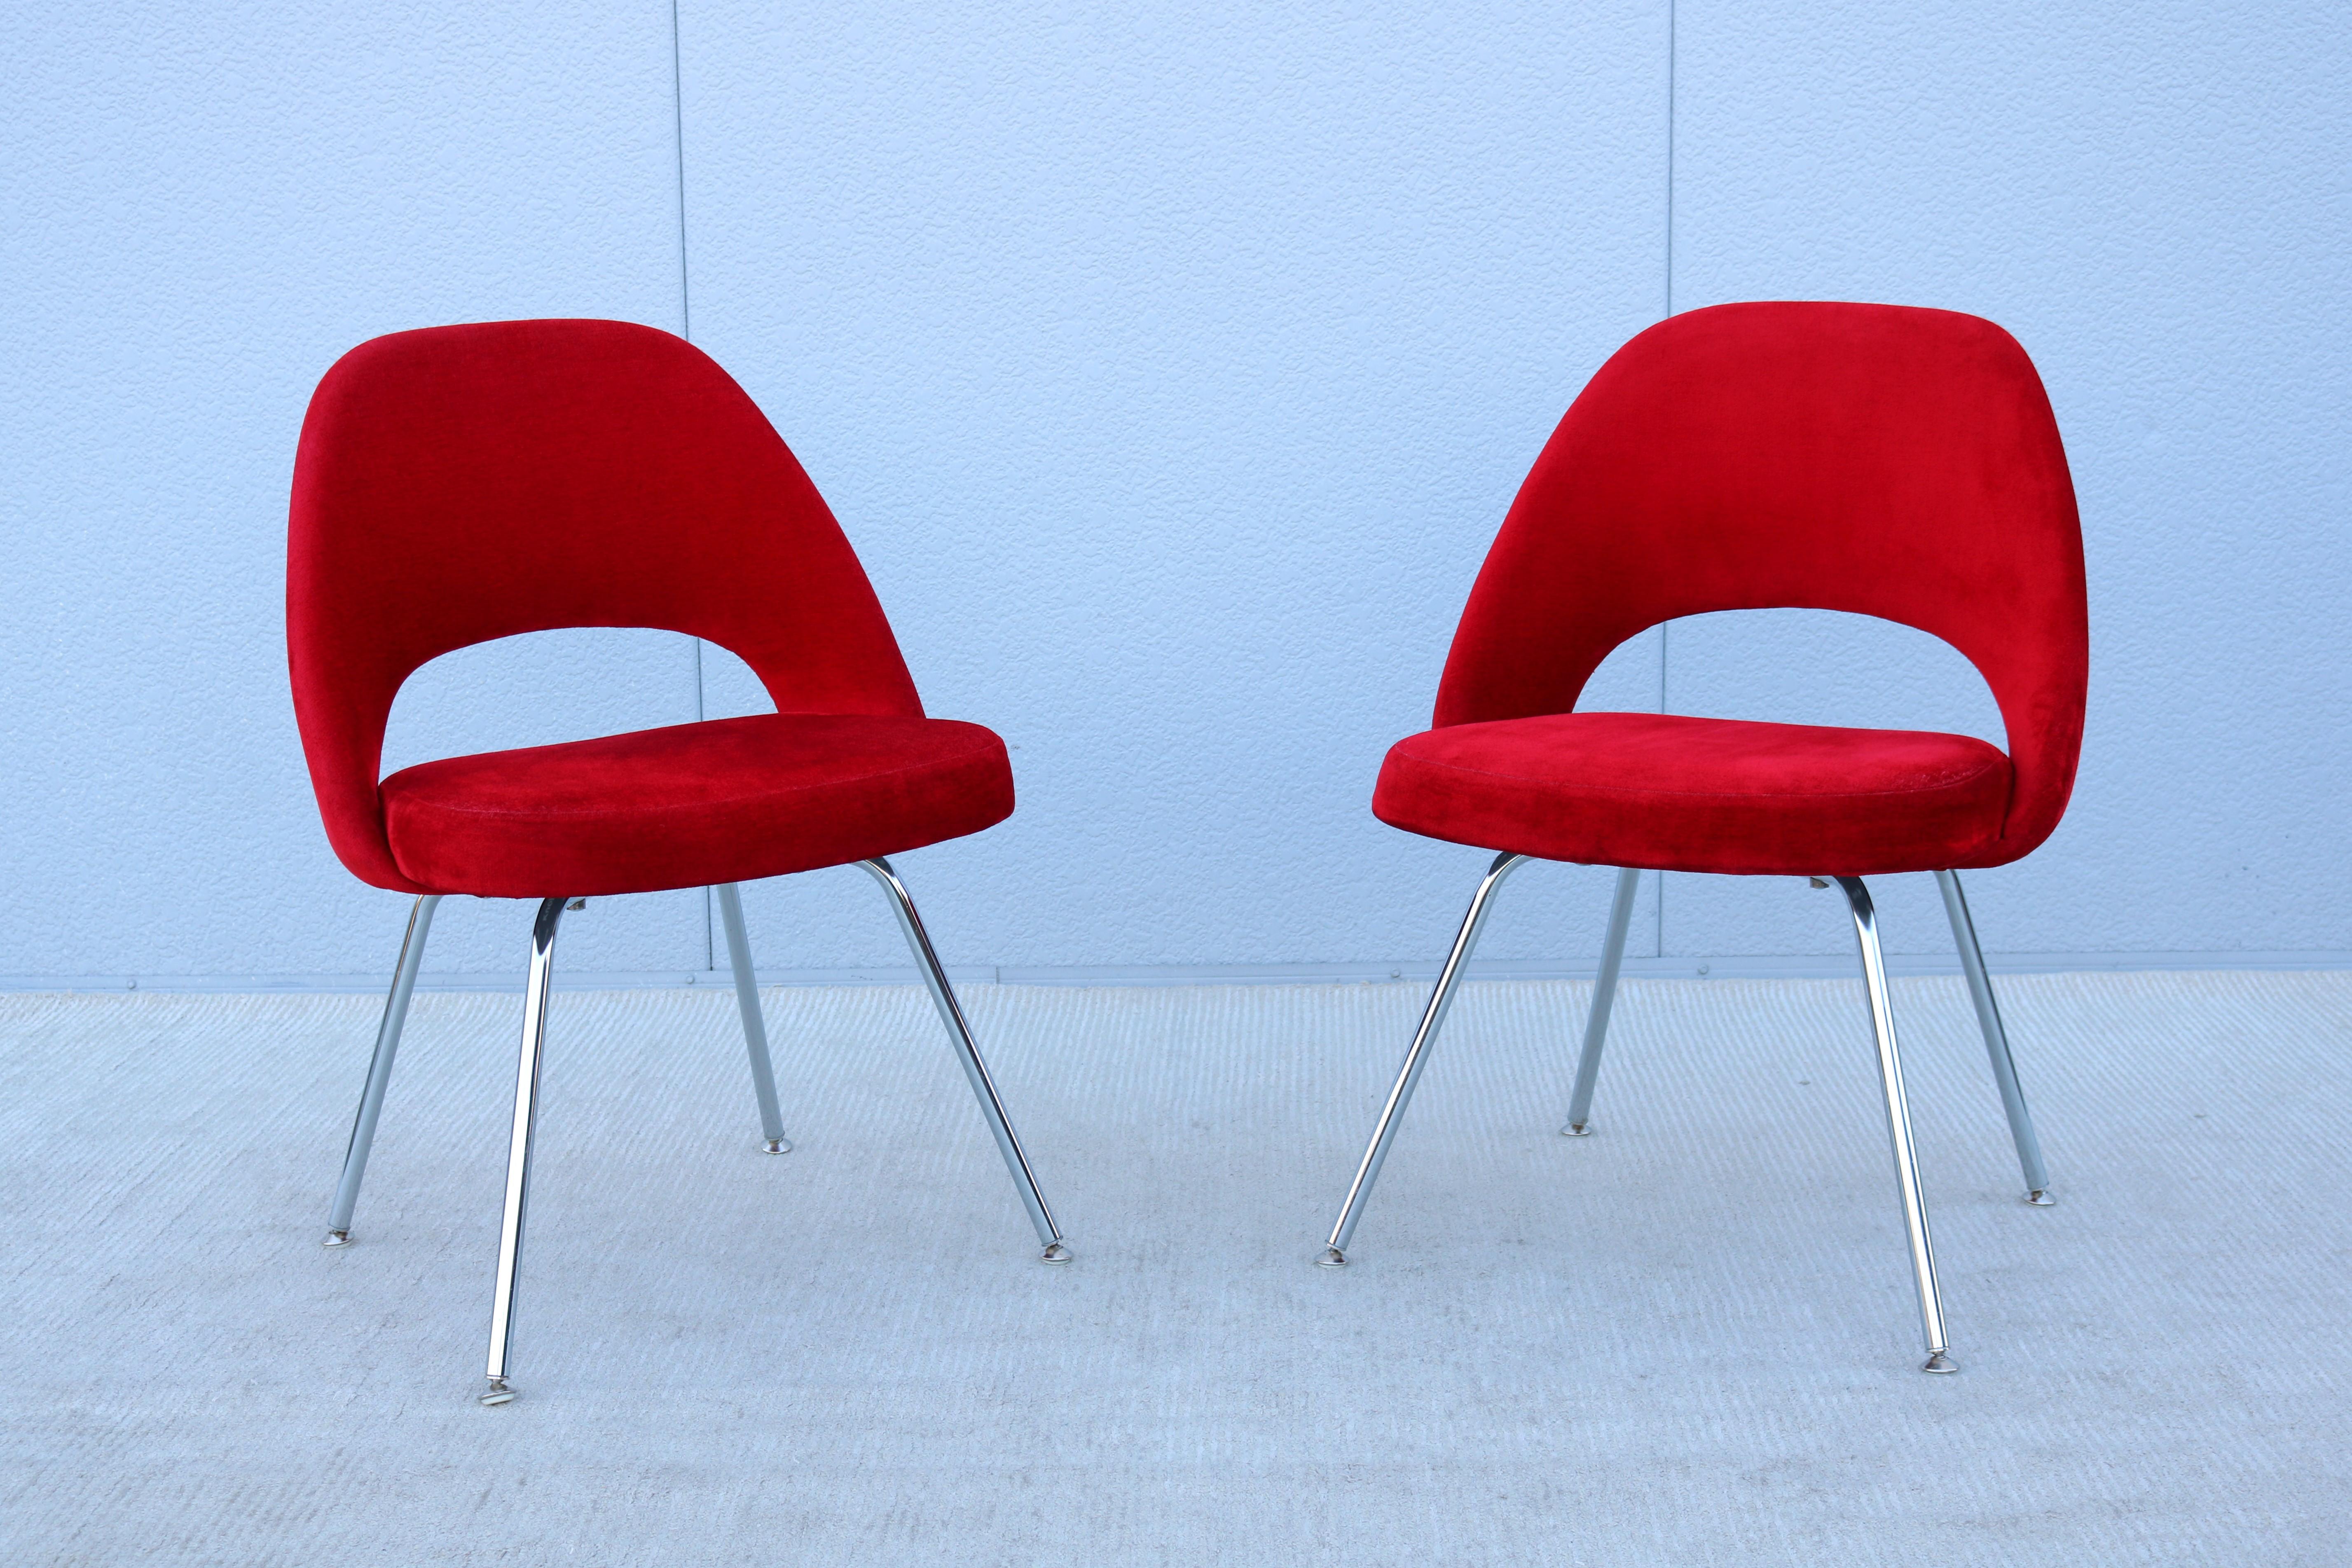 Mid-Century Modern Eero Saarinen for Knoll Red Executive Armless Chairs - a Pair In Good Condition For Sale In Secaucus, NJ